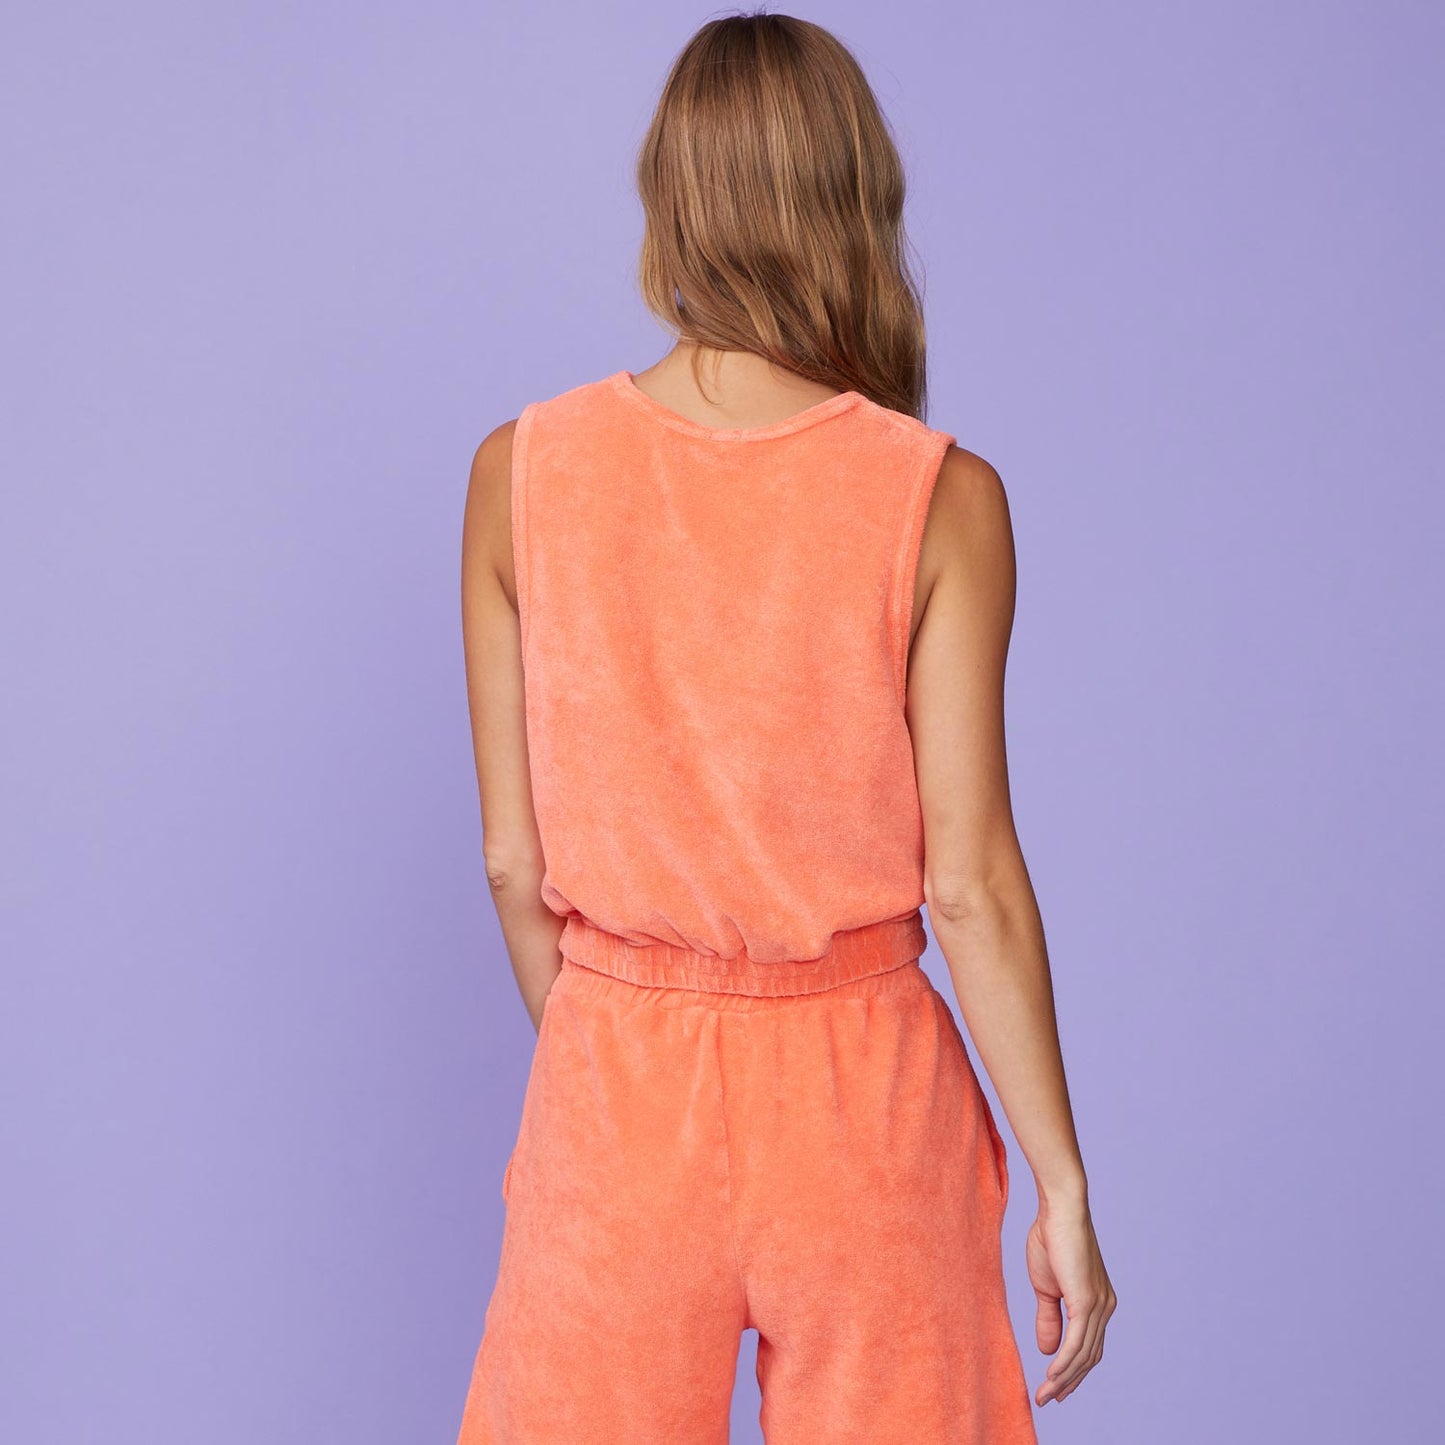 Back View of model wearing the Terry Cloth Tank in Georgia Peach.